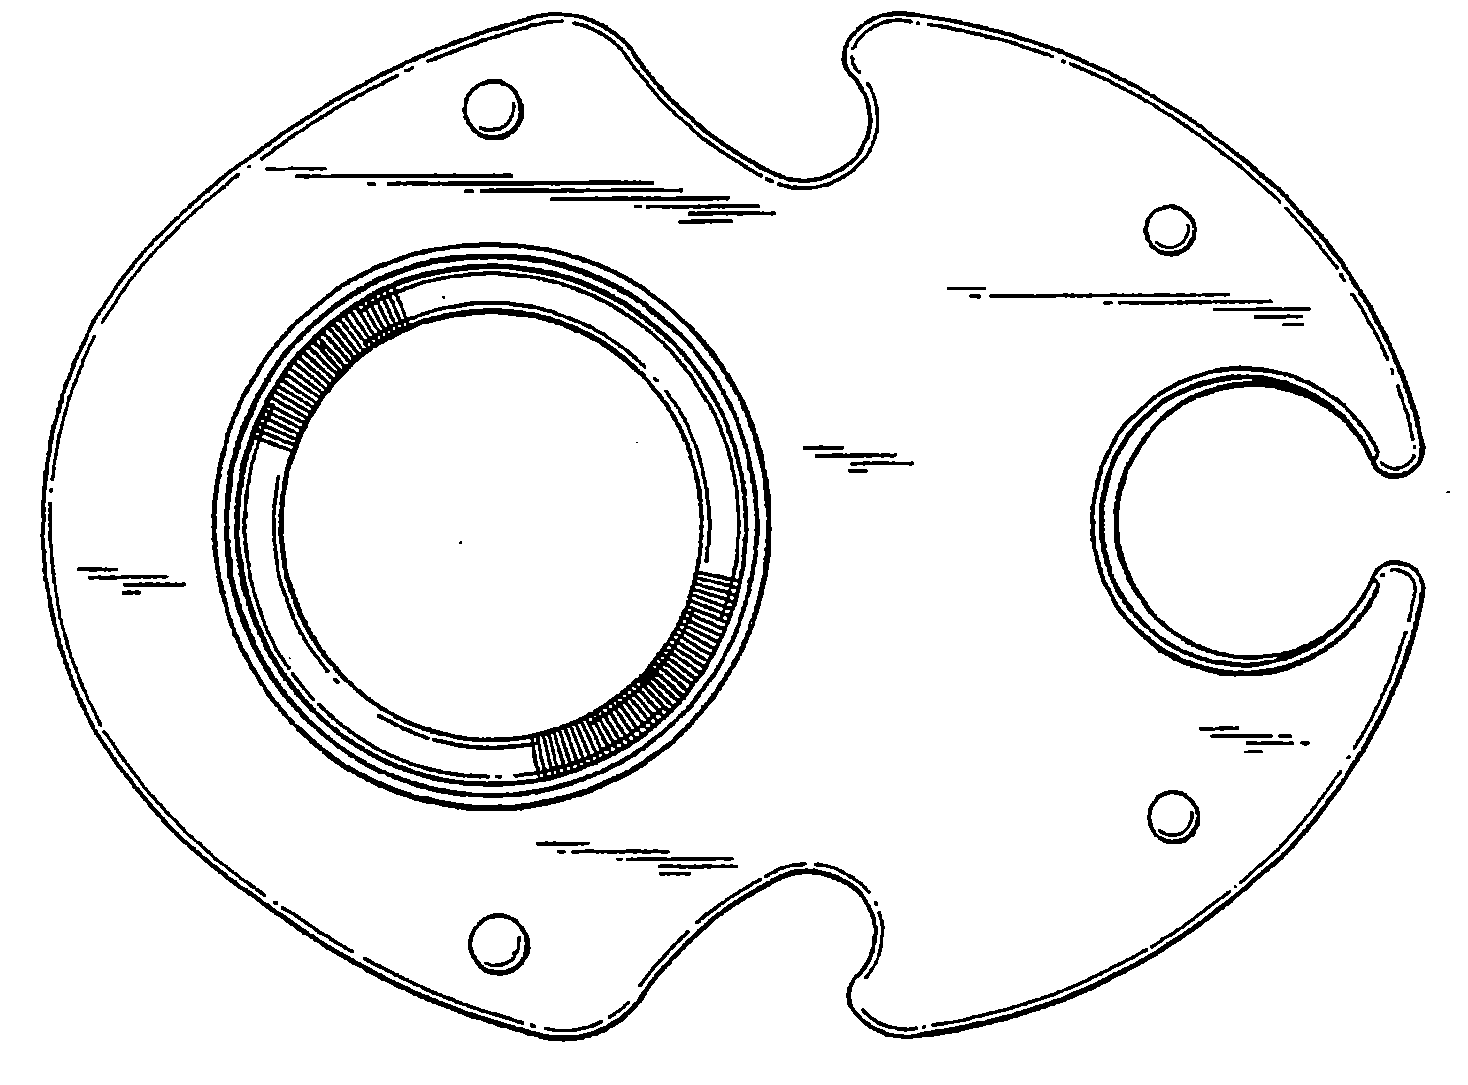 Example of a design for a symmetric compartmented traythat includes a circular compartment.
